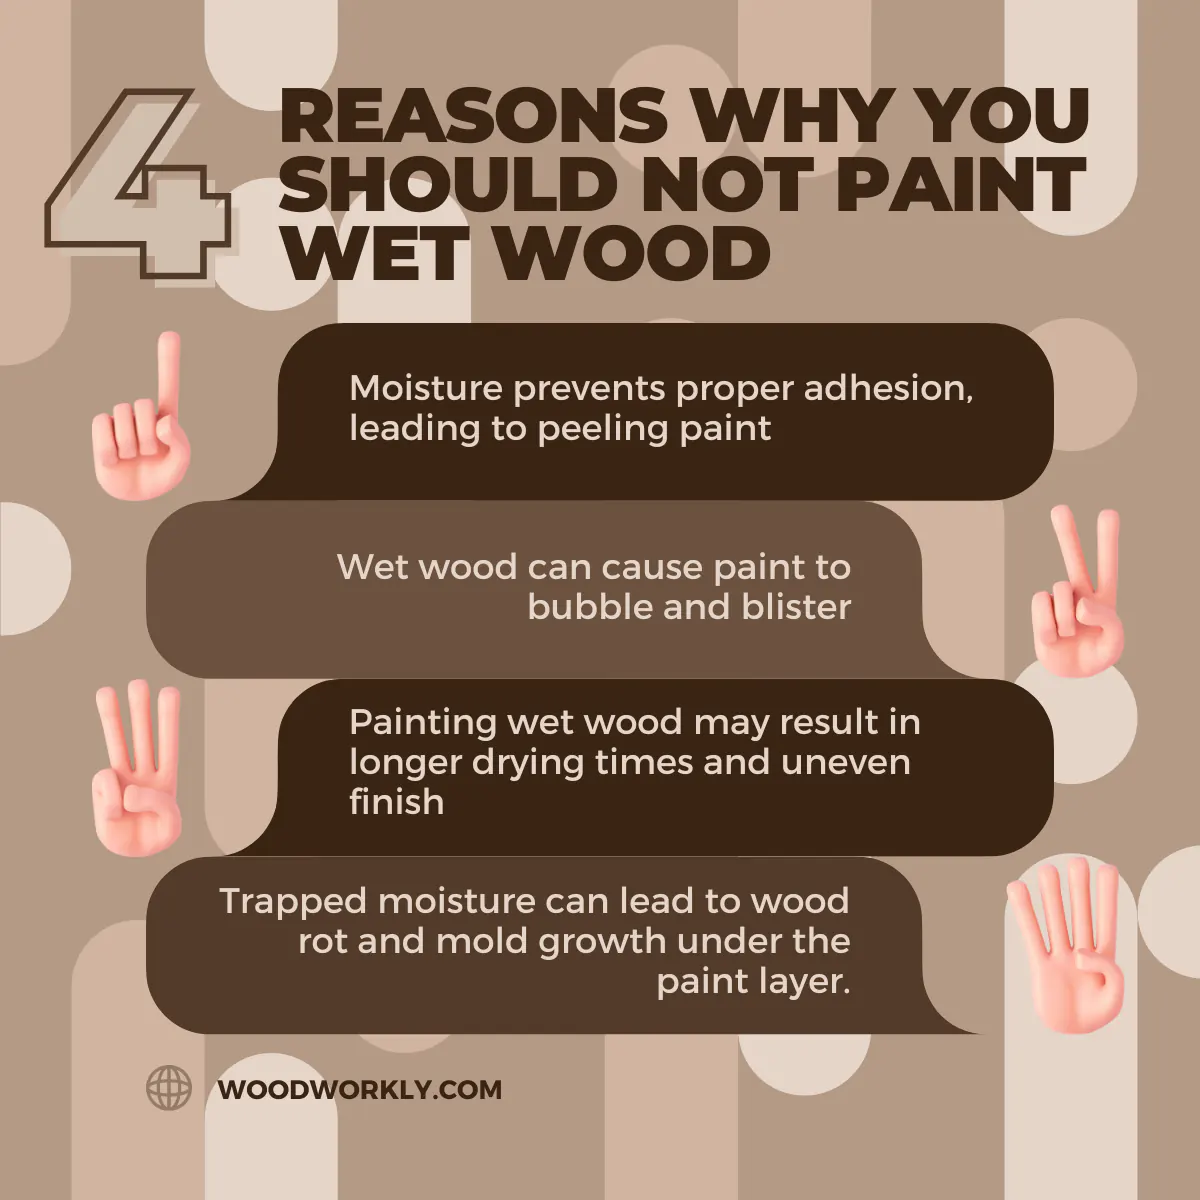 Reasons why you should not paint wet wood